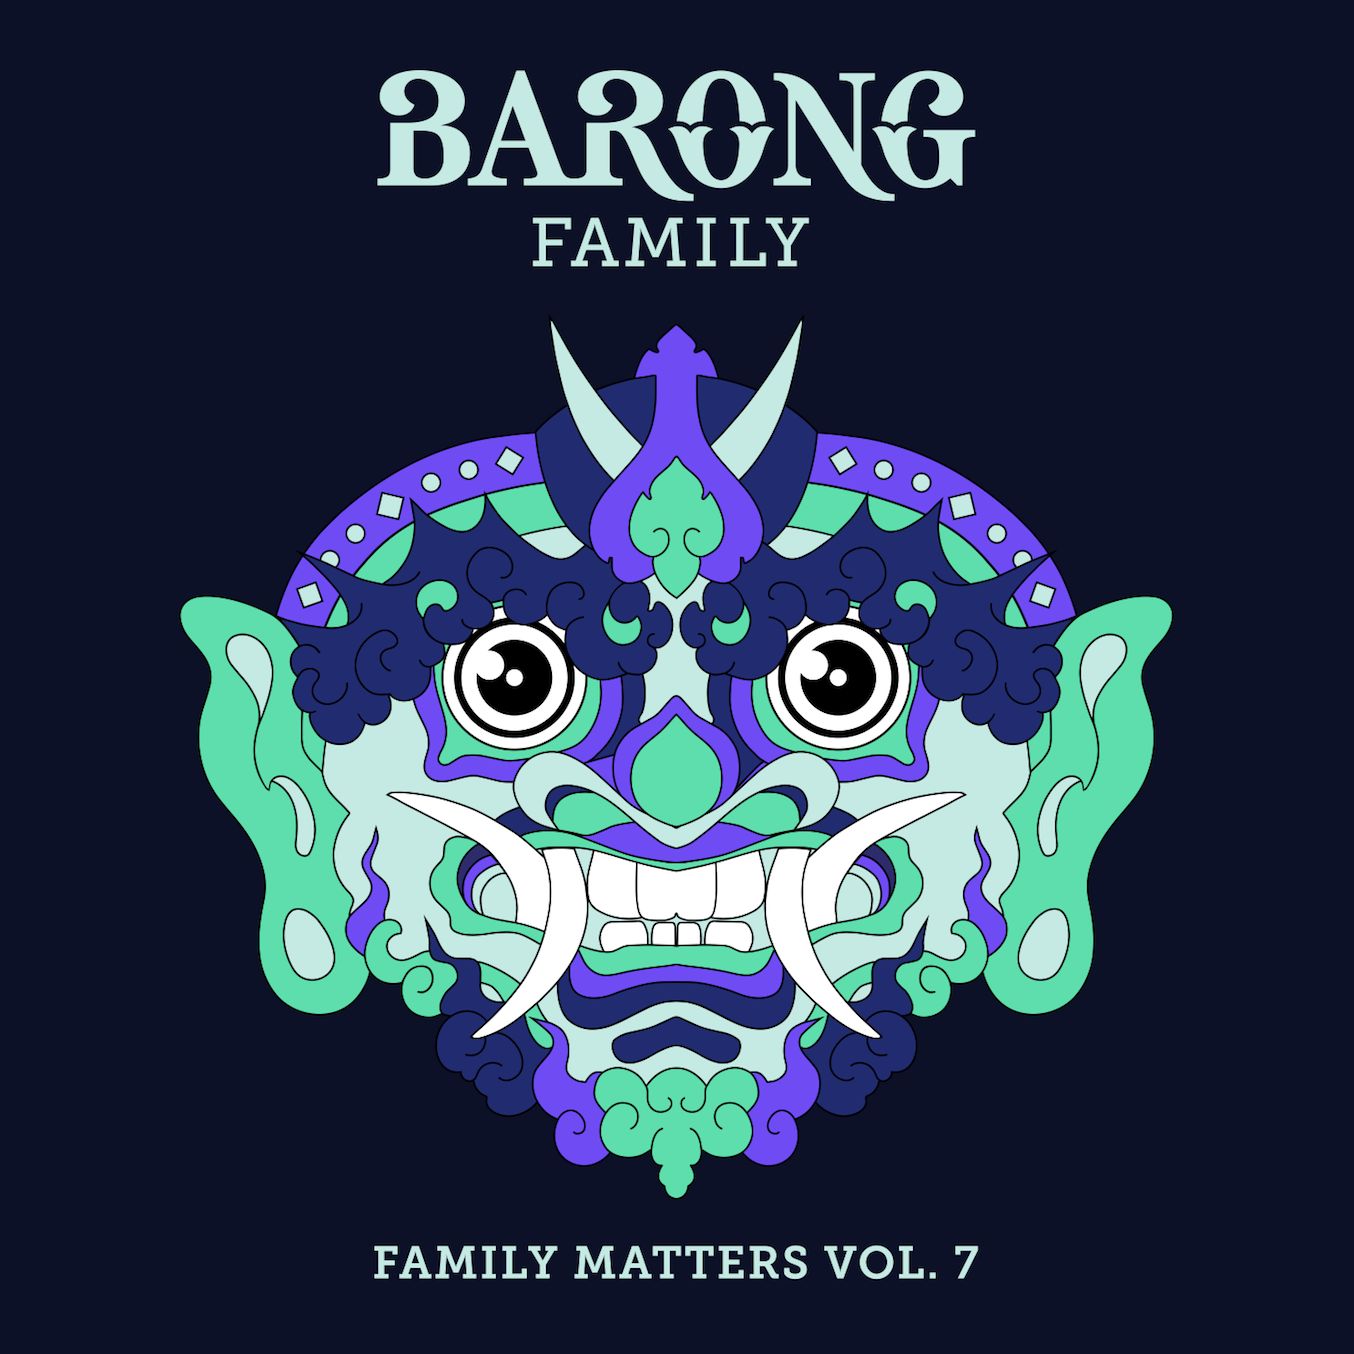 Notorious CHRIS & Jerrÿ Jay Team Up For “I Would Never” On Barong Family Matters Vol. 7